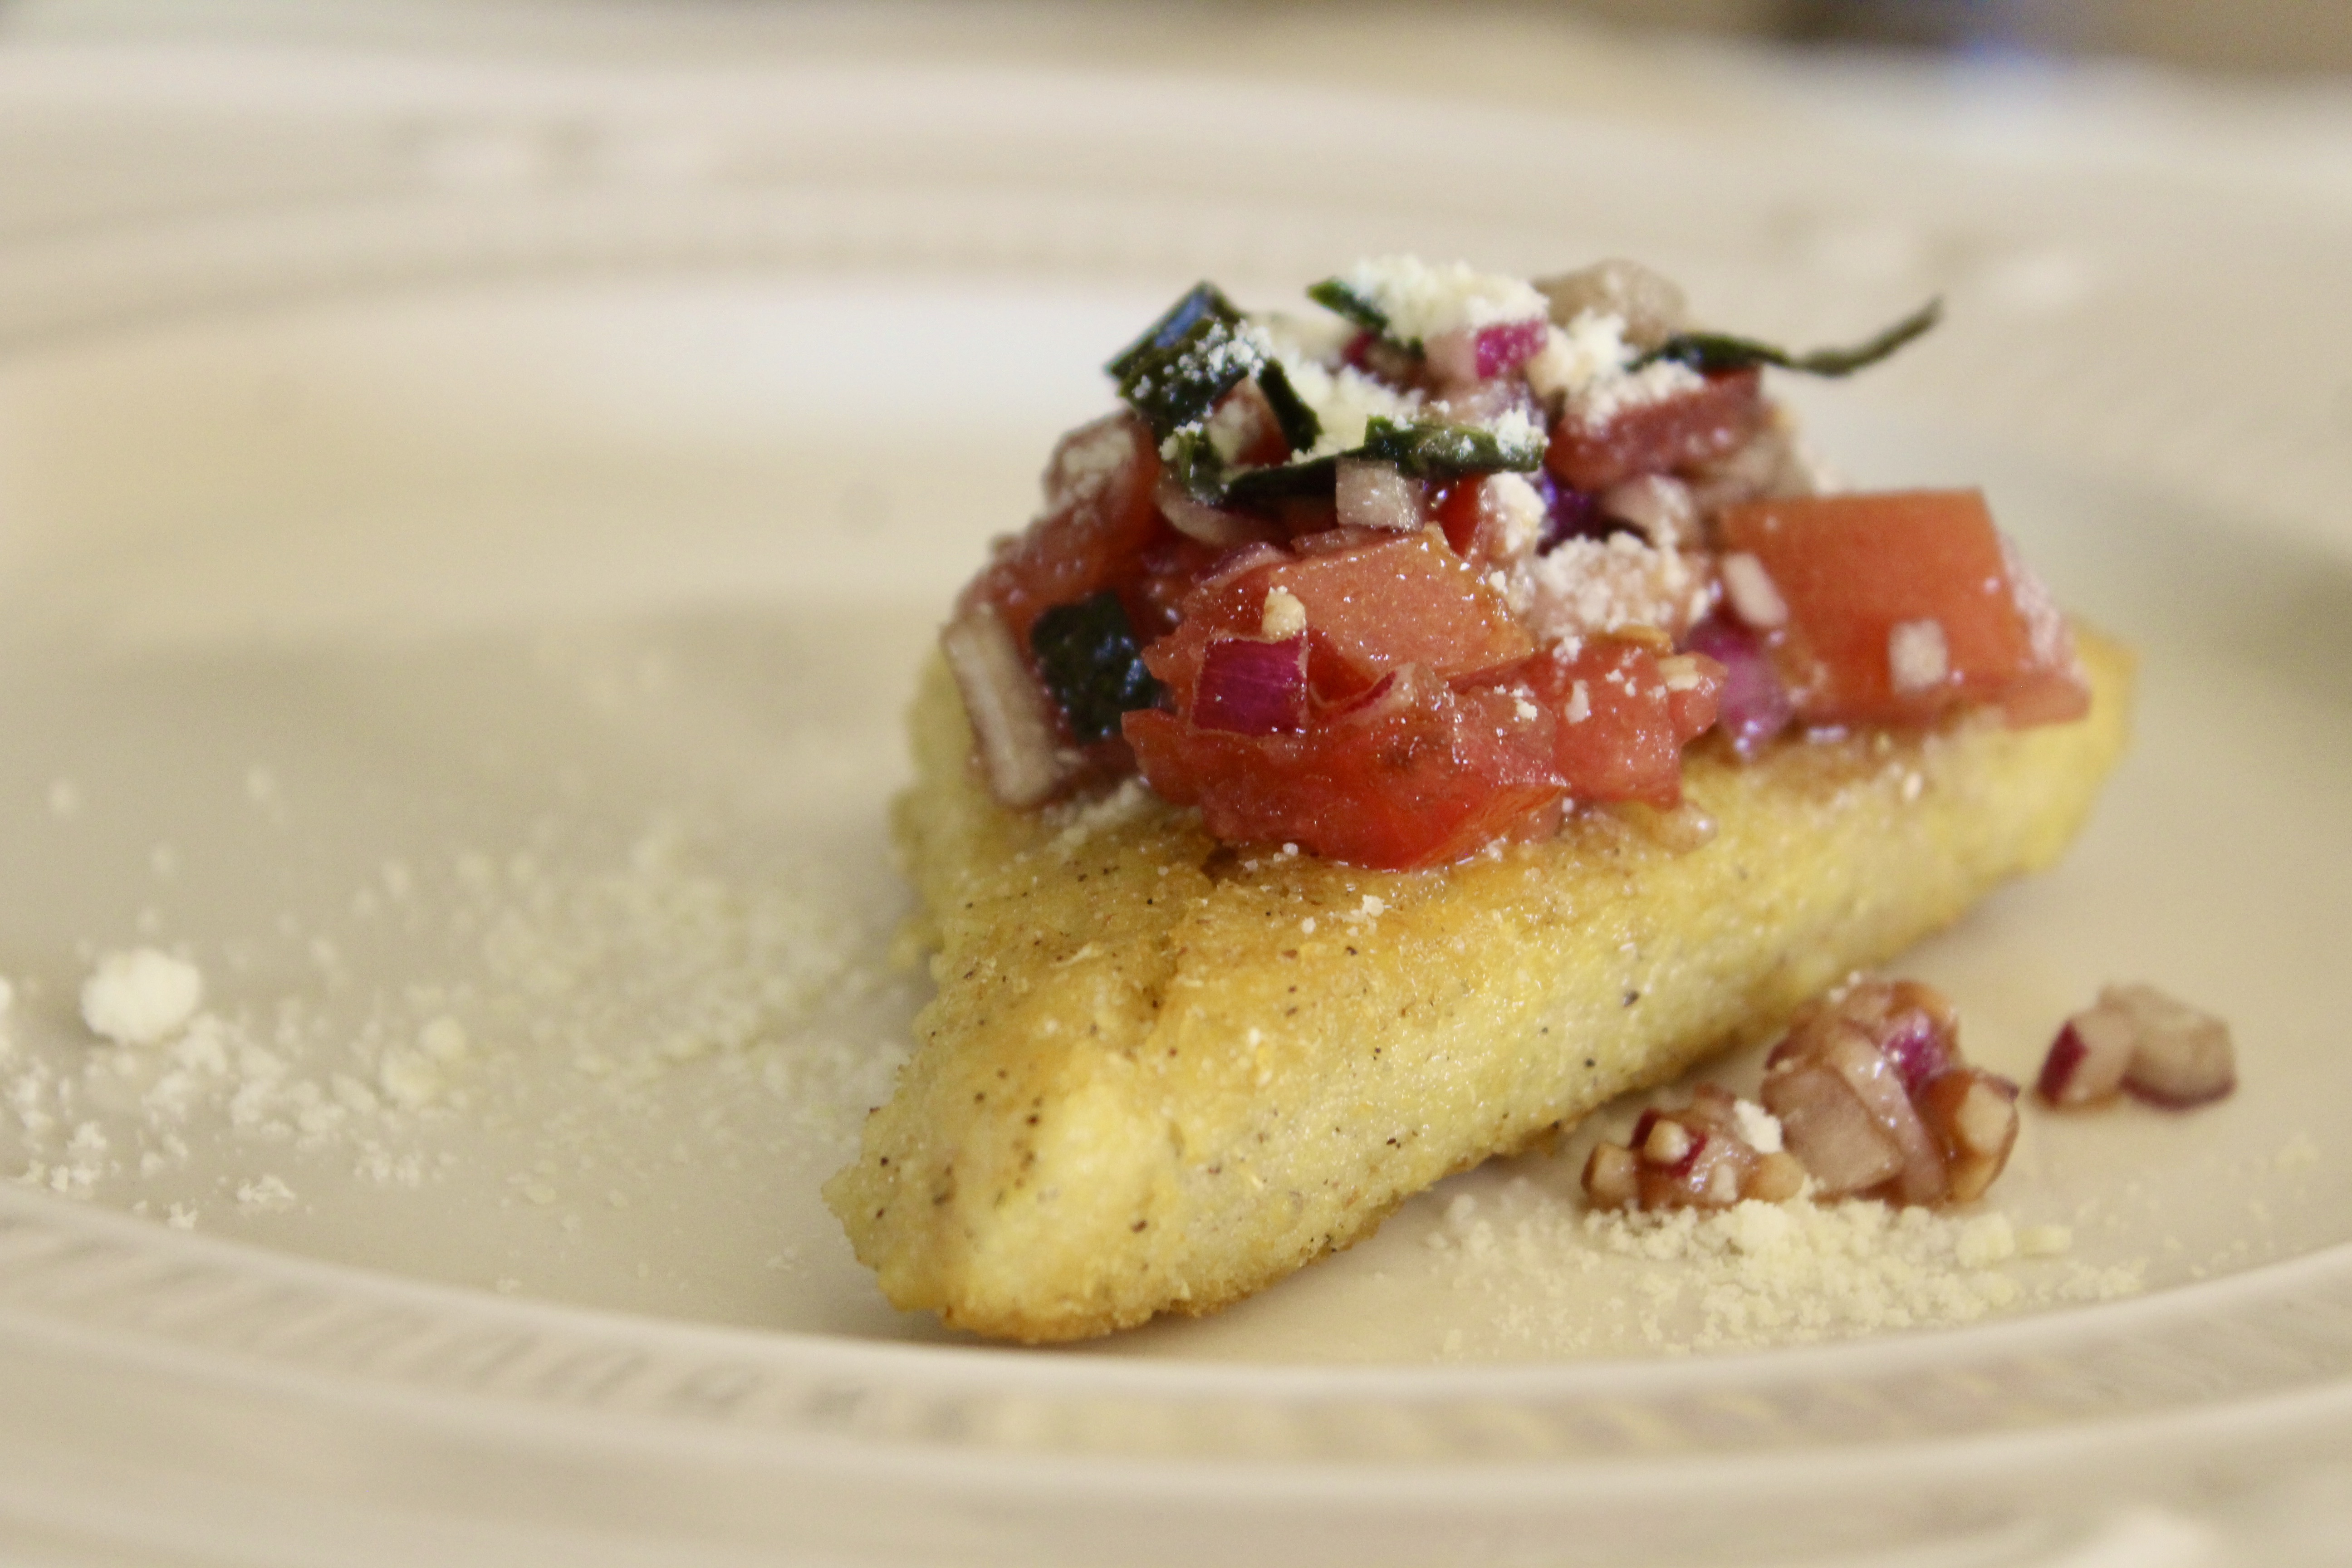 Pan-Fried Polenta with Bruschetta Topping